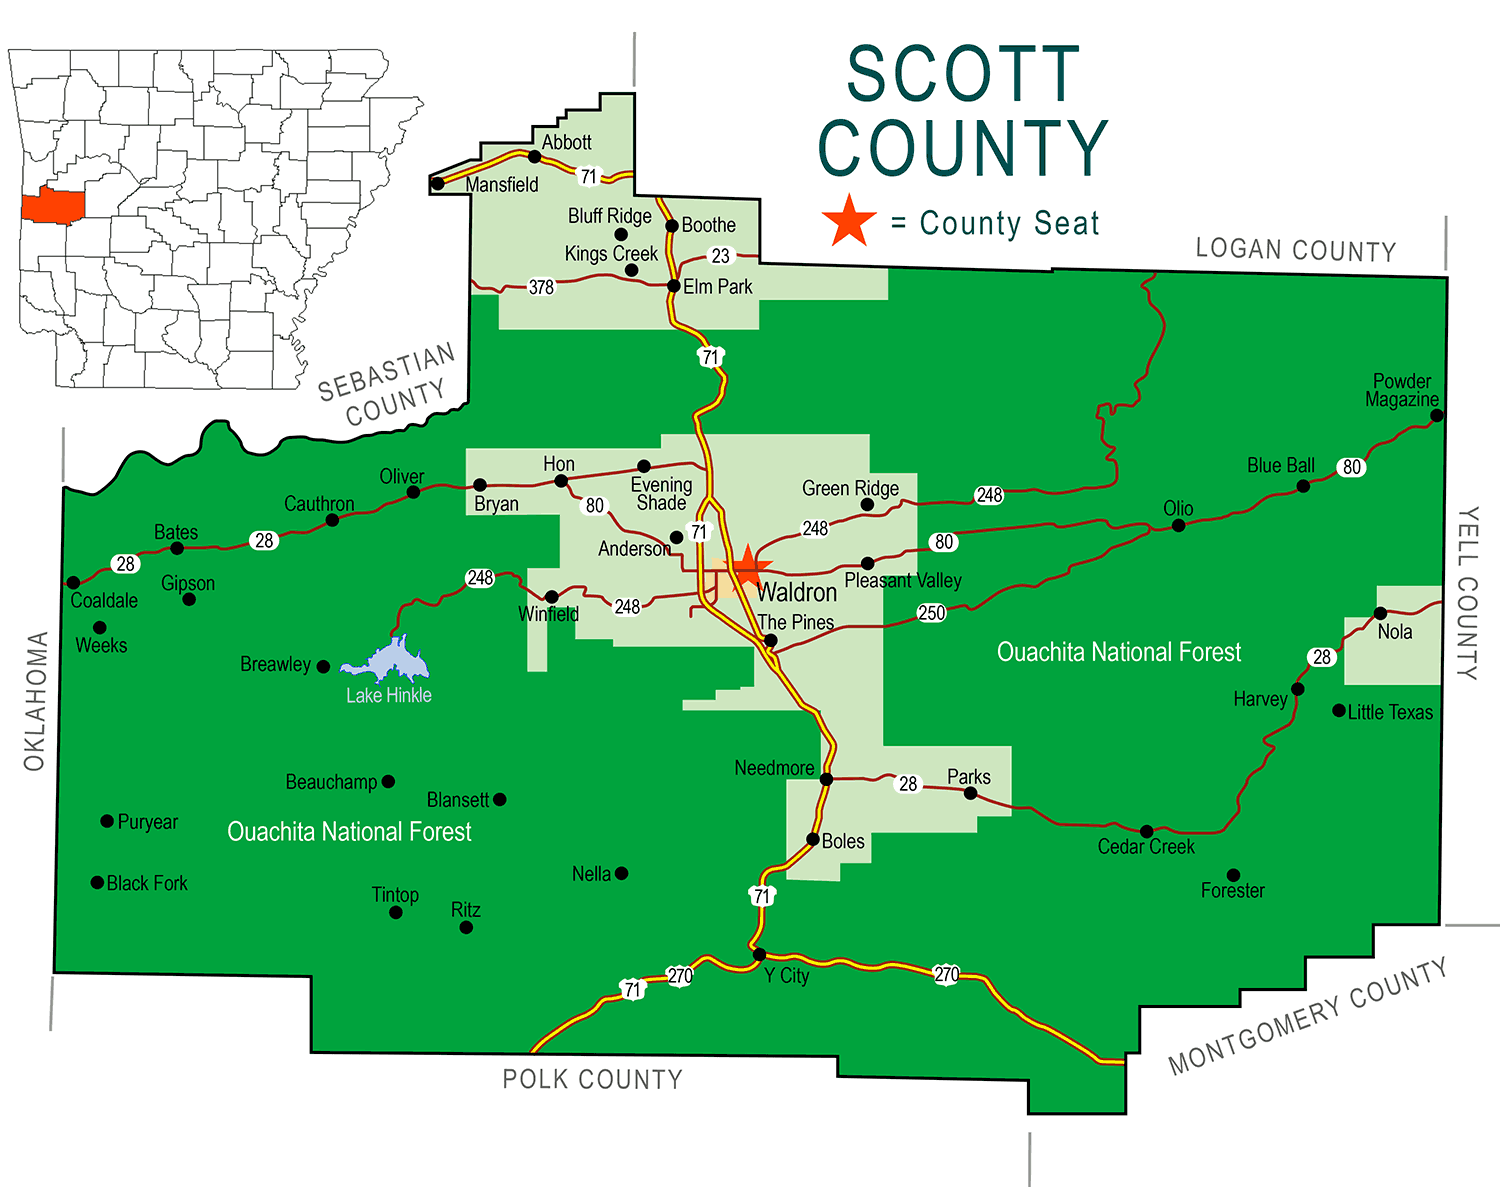 "Scott County" map with borders roads cities lake national forest